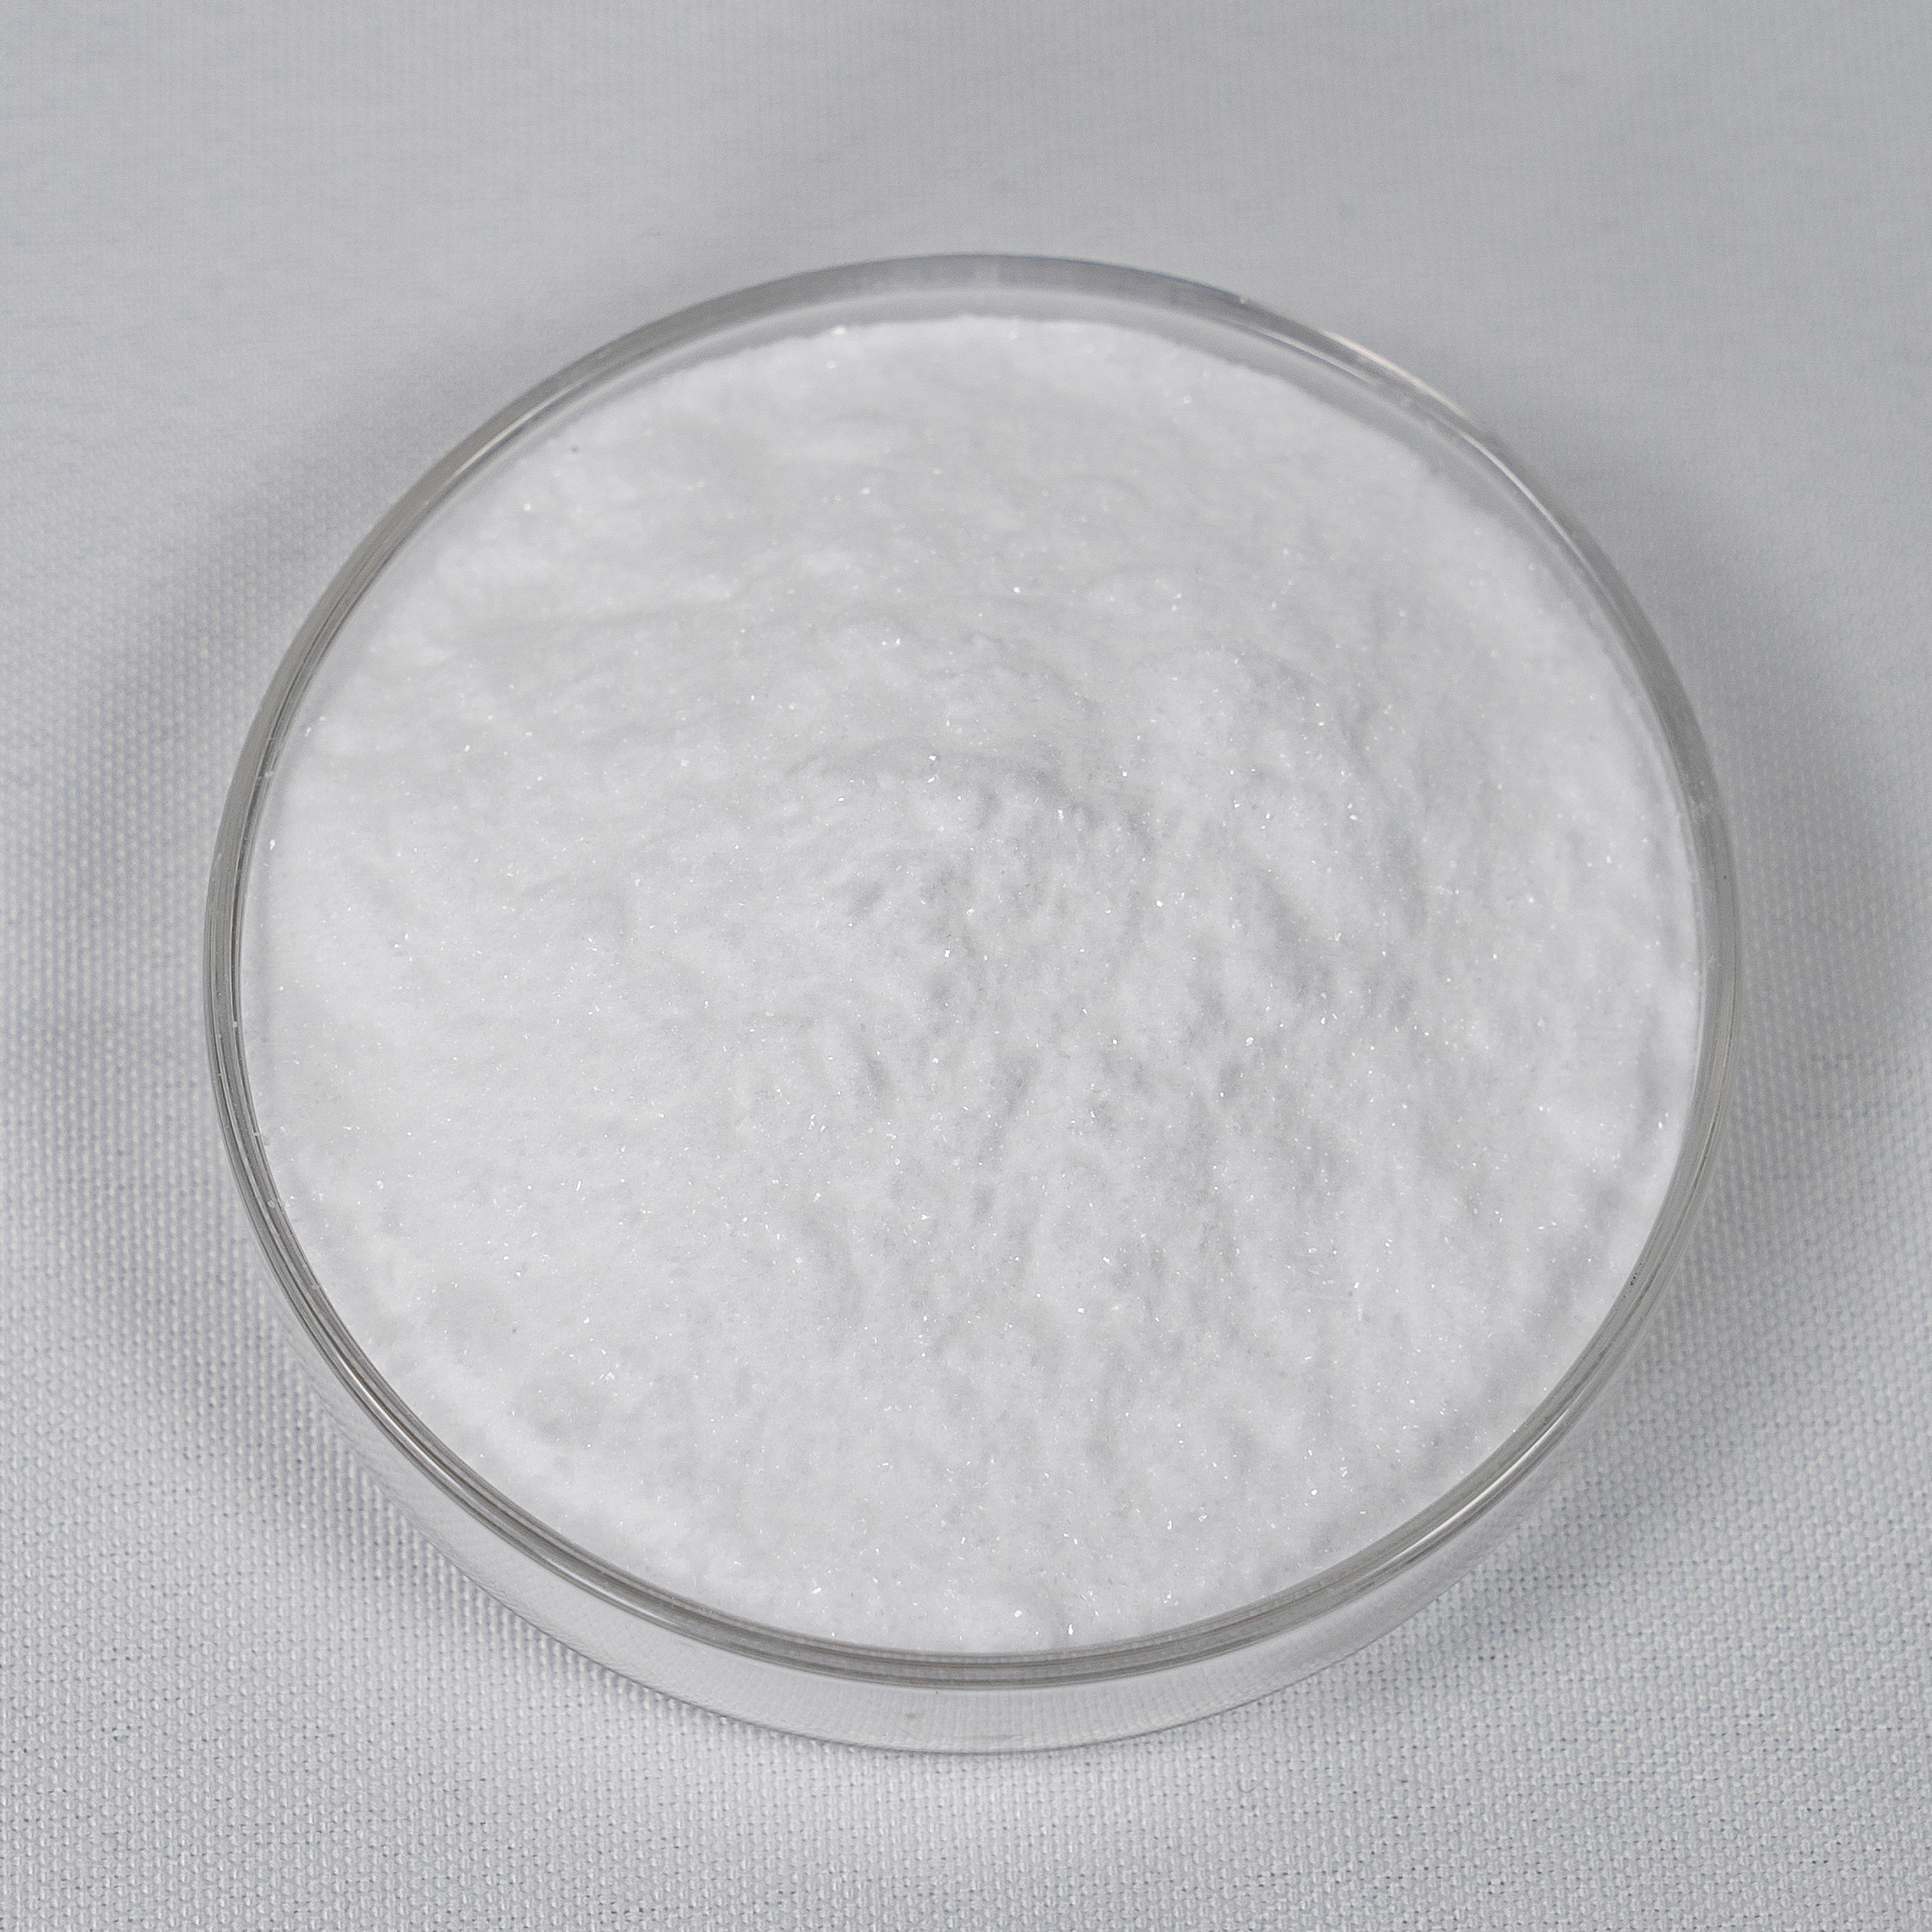 Decrect Packing High Quality Pregabalin lyrica Powder/ Crystal with Fast Shipping From China Top Chemical Manufacturer 